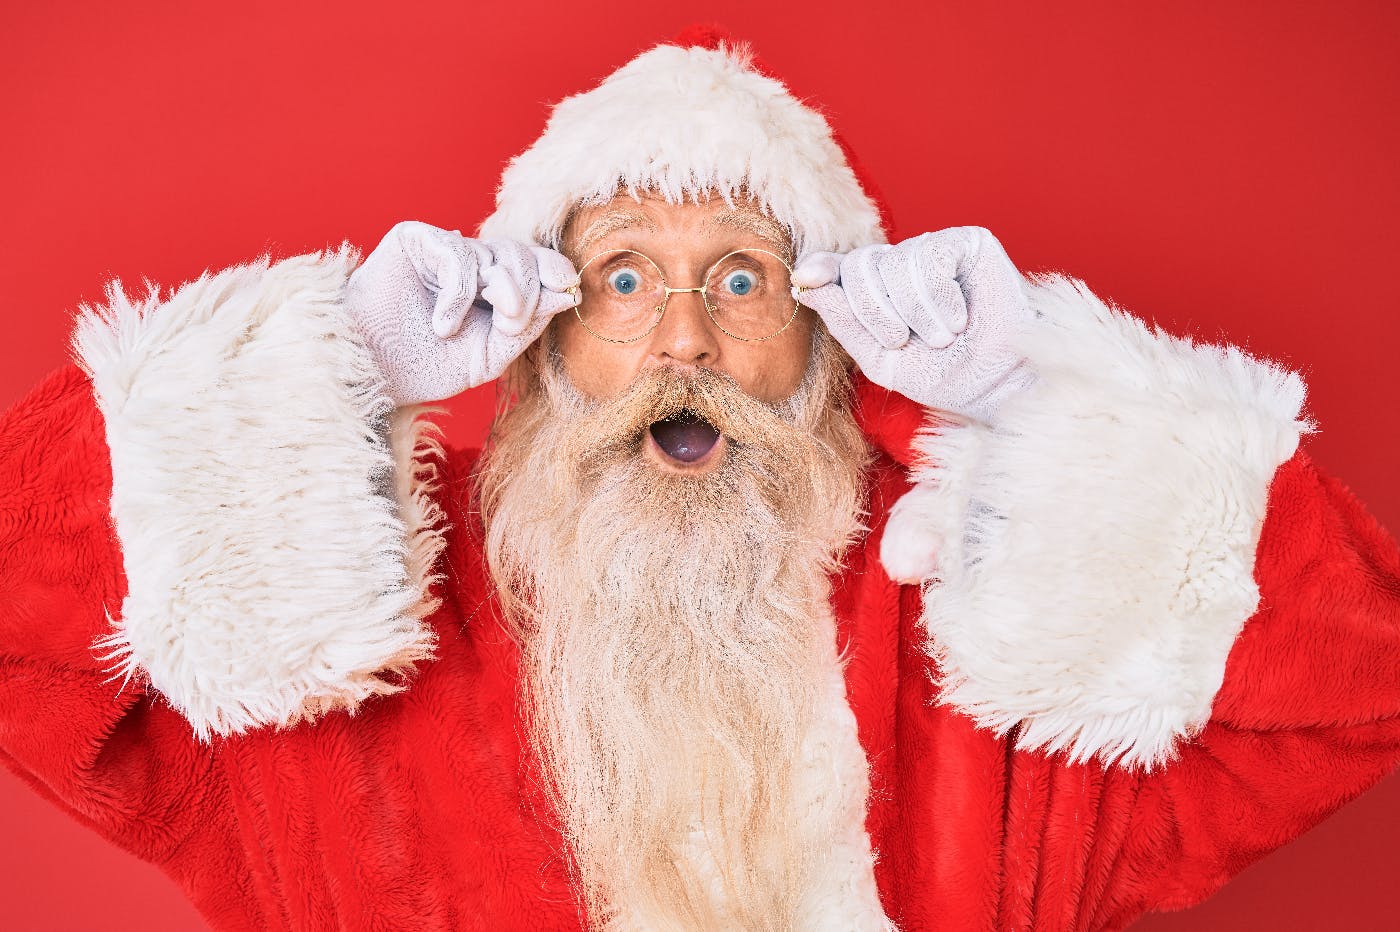 A man dressed as Santa with a natural beard, holding his round glasses and giving a open mouth smile